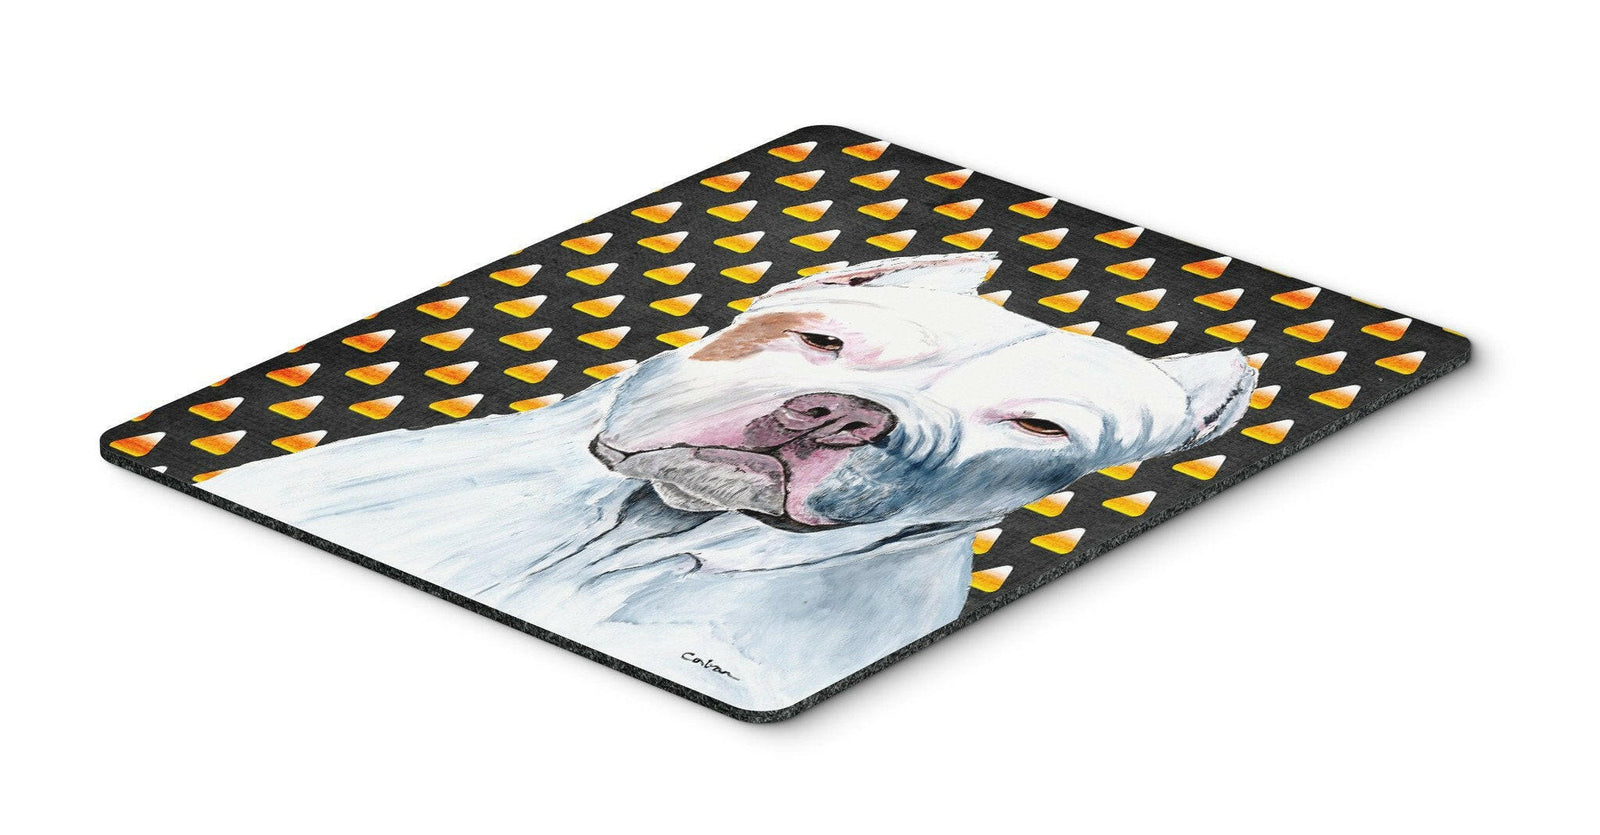 Pit Bull Candy Corn Halloween Portrait Mouse Pad, Hot Pad or Trivet by Caroline's Treasures